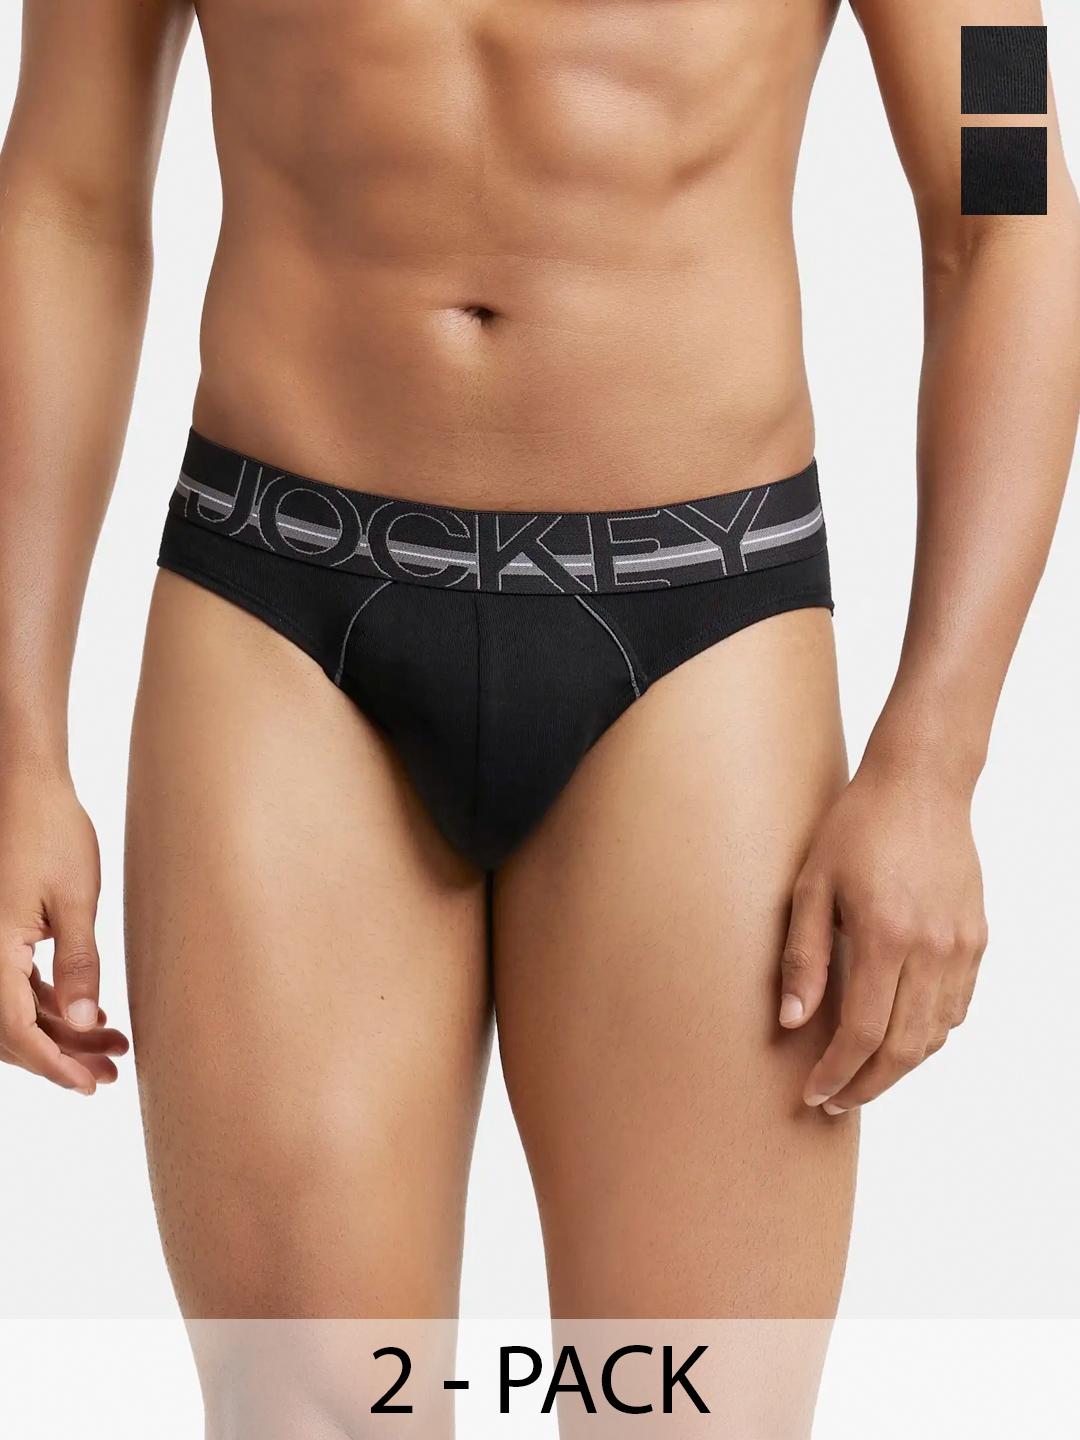 2 Pack Precision Bonded Full Briefs; Style: LFB98249 - Black